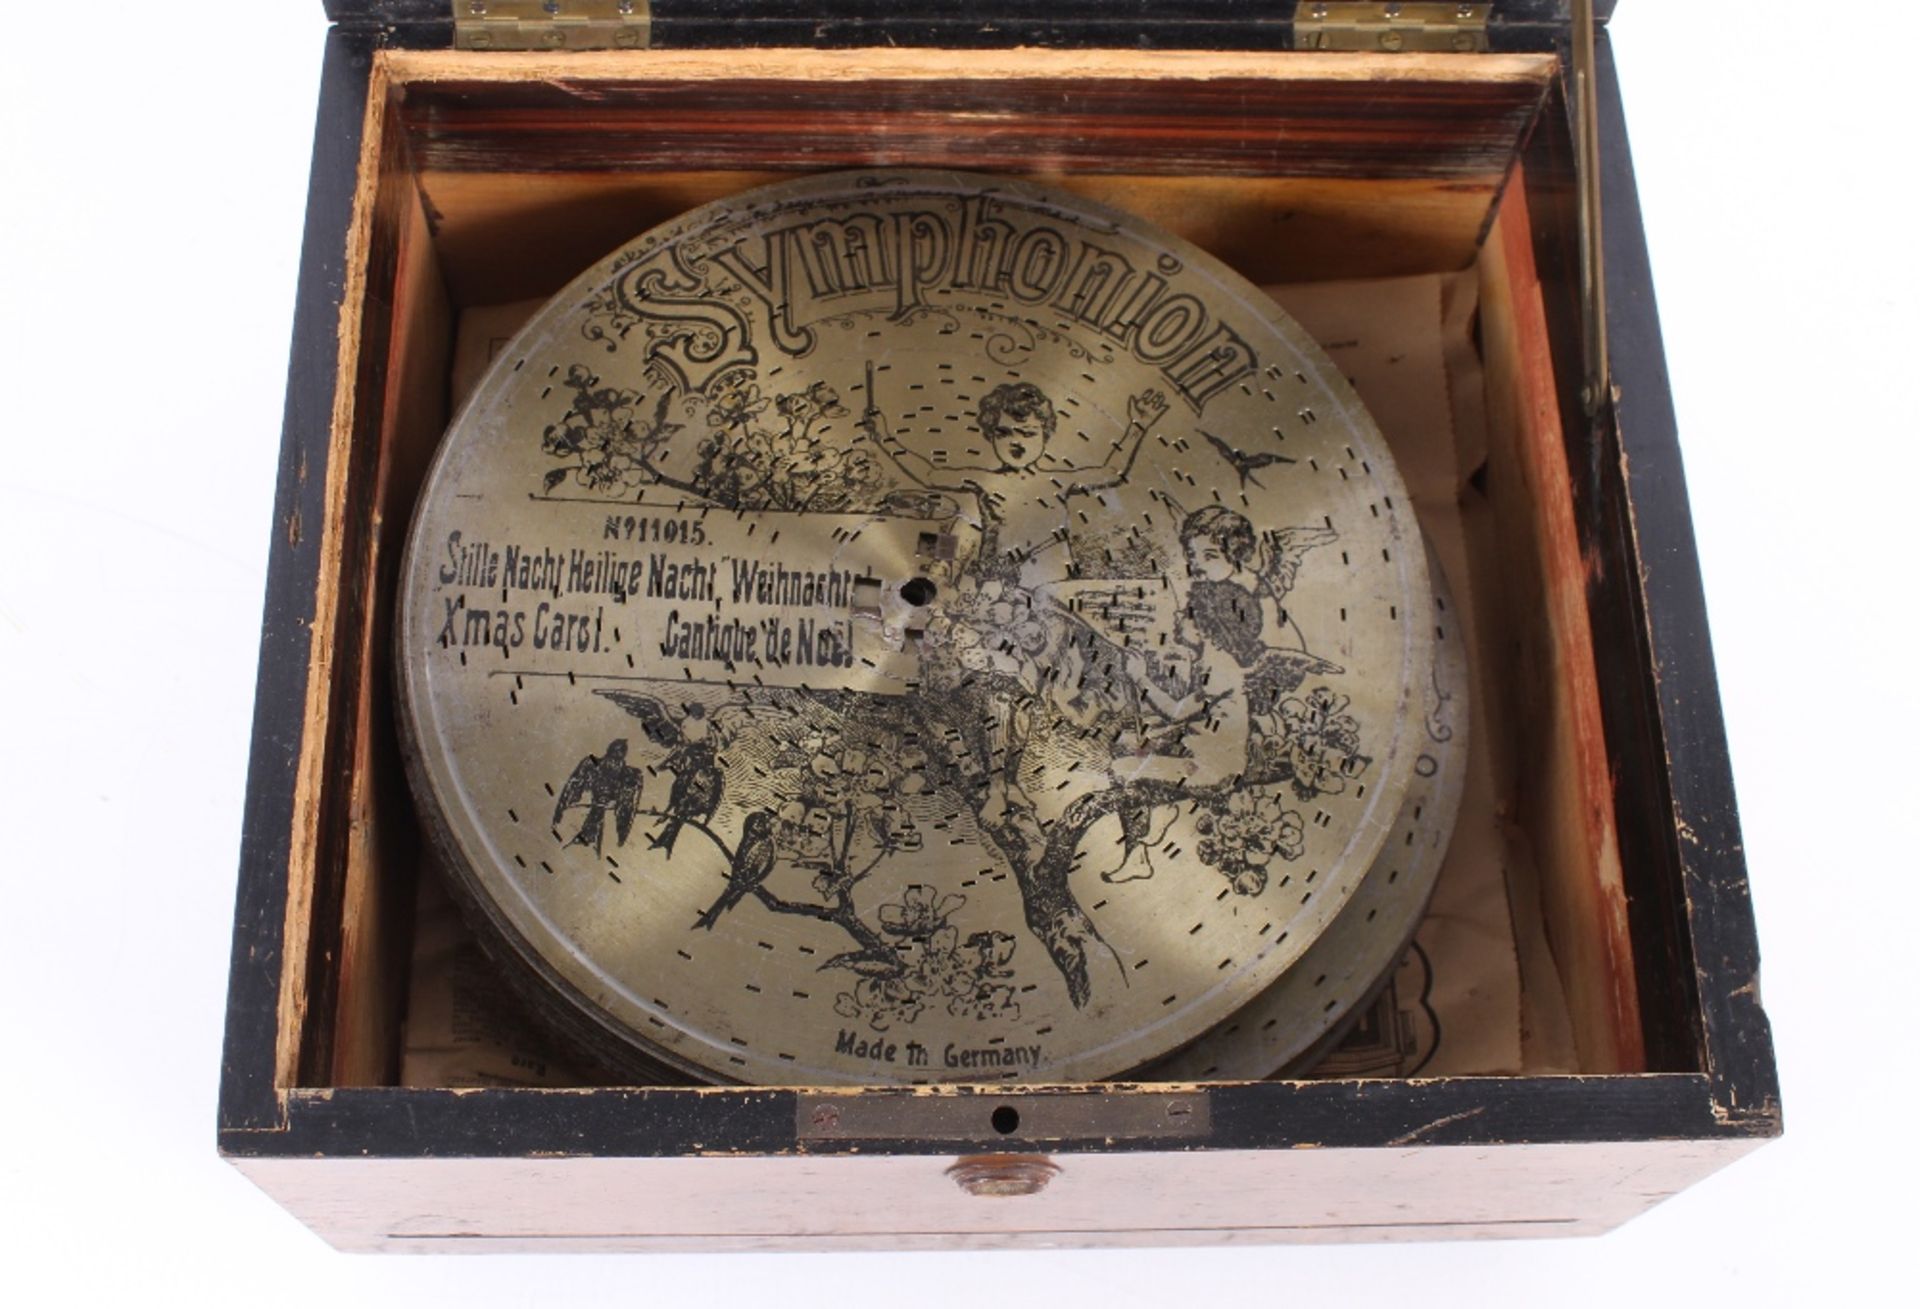 A Symphonion table model polyphon, in walnut case inscribed "Note Tune Plaque No. 48" and a - Image 9 of 9